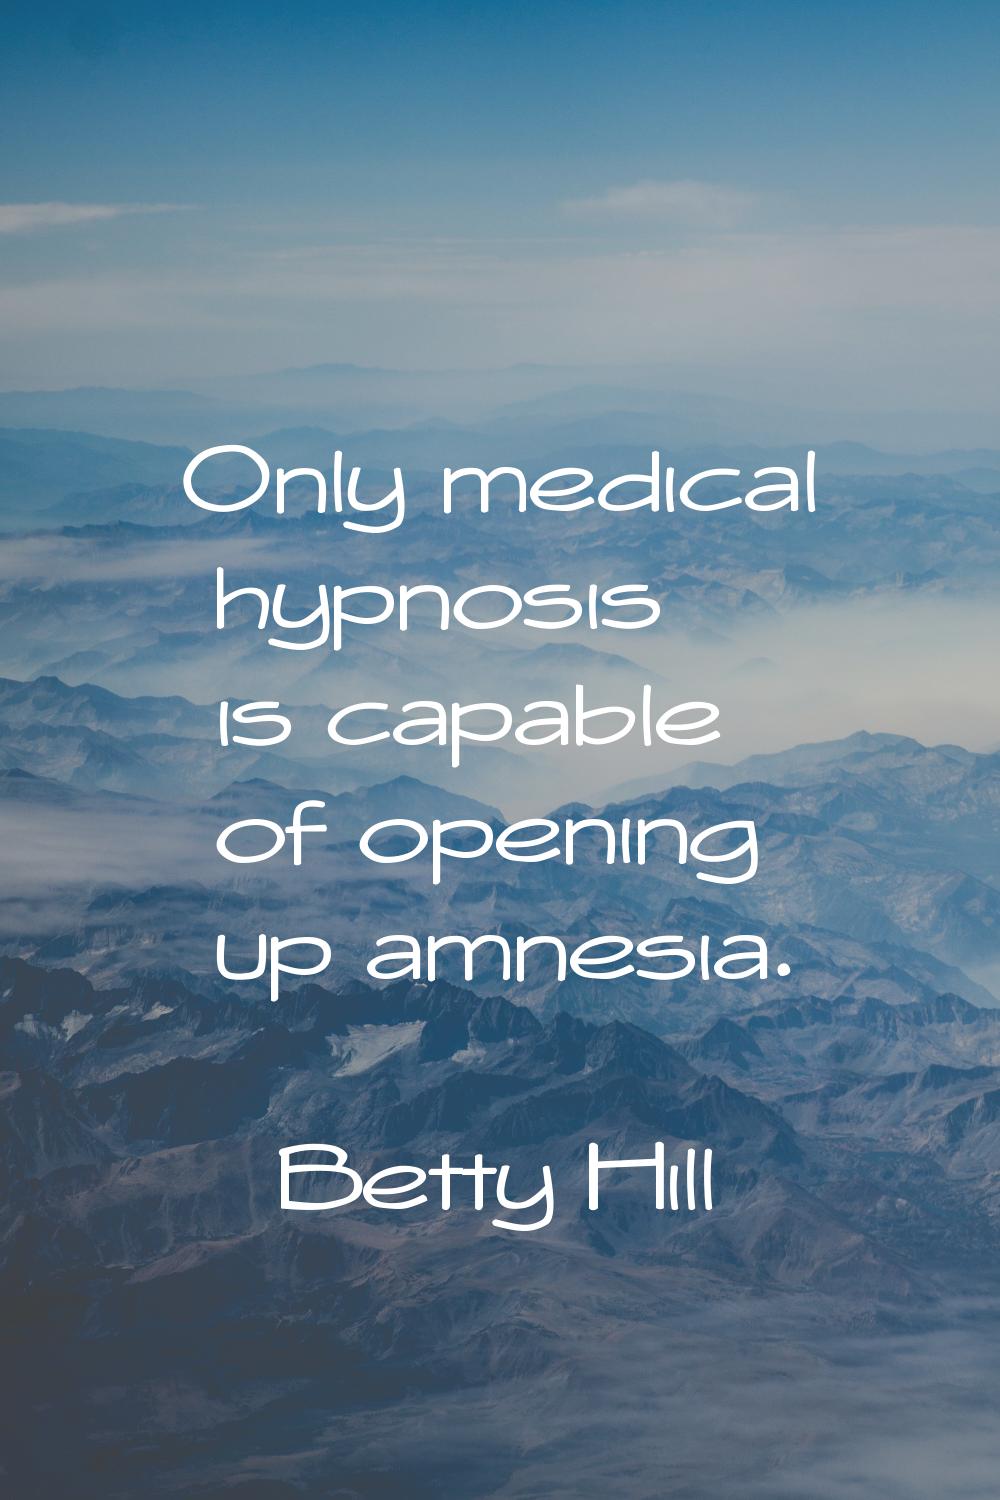 Only medical hypnosis is capable of opening up amnesia.